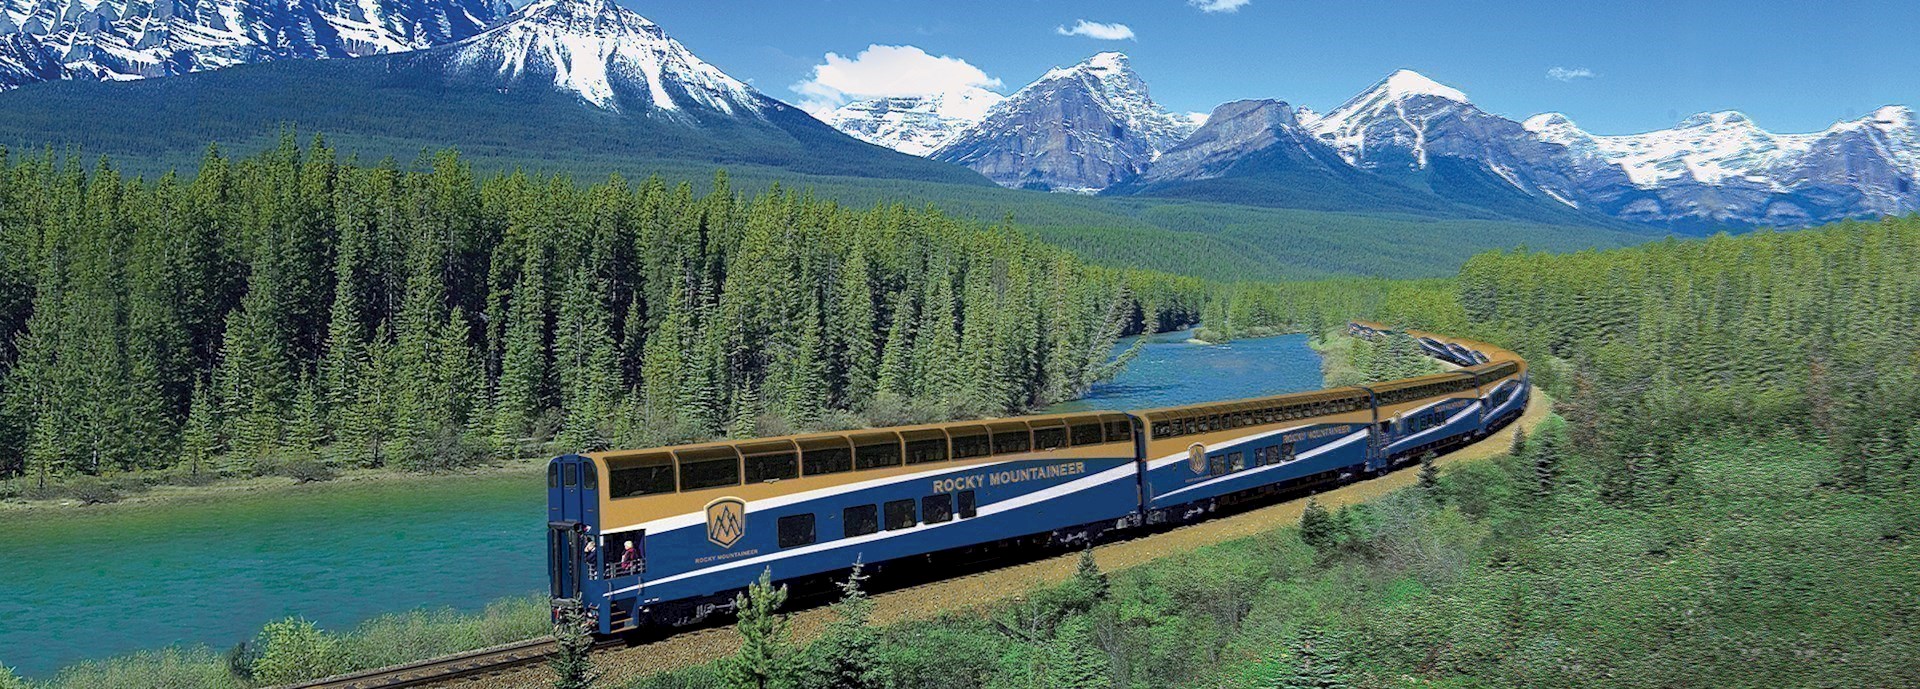 travel by train to canada